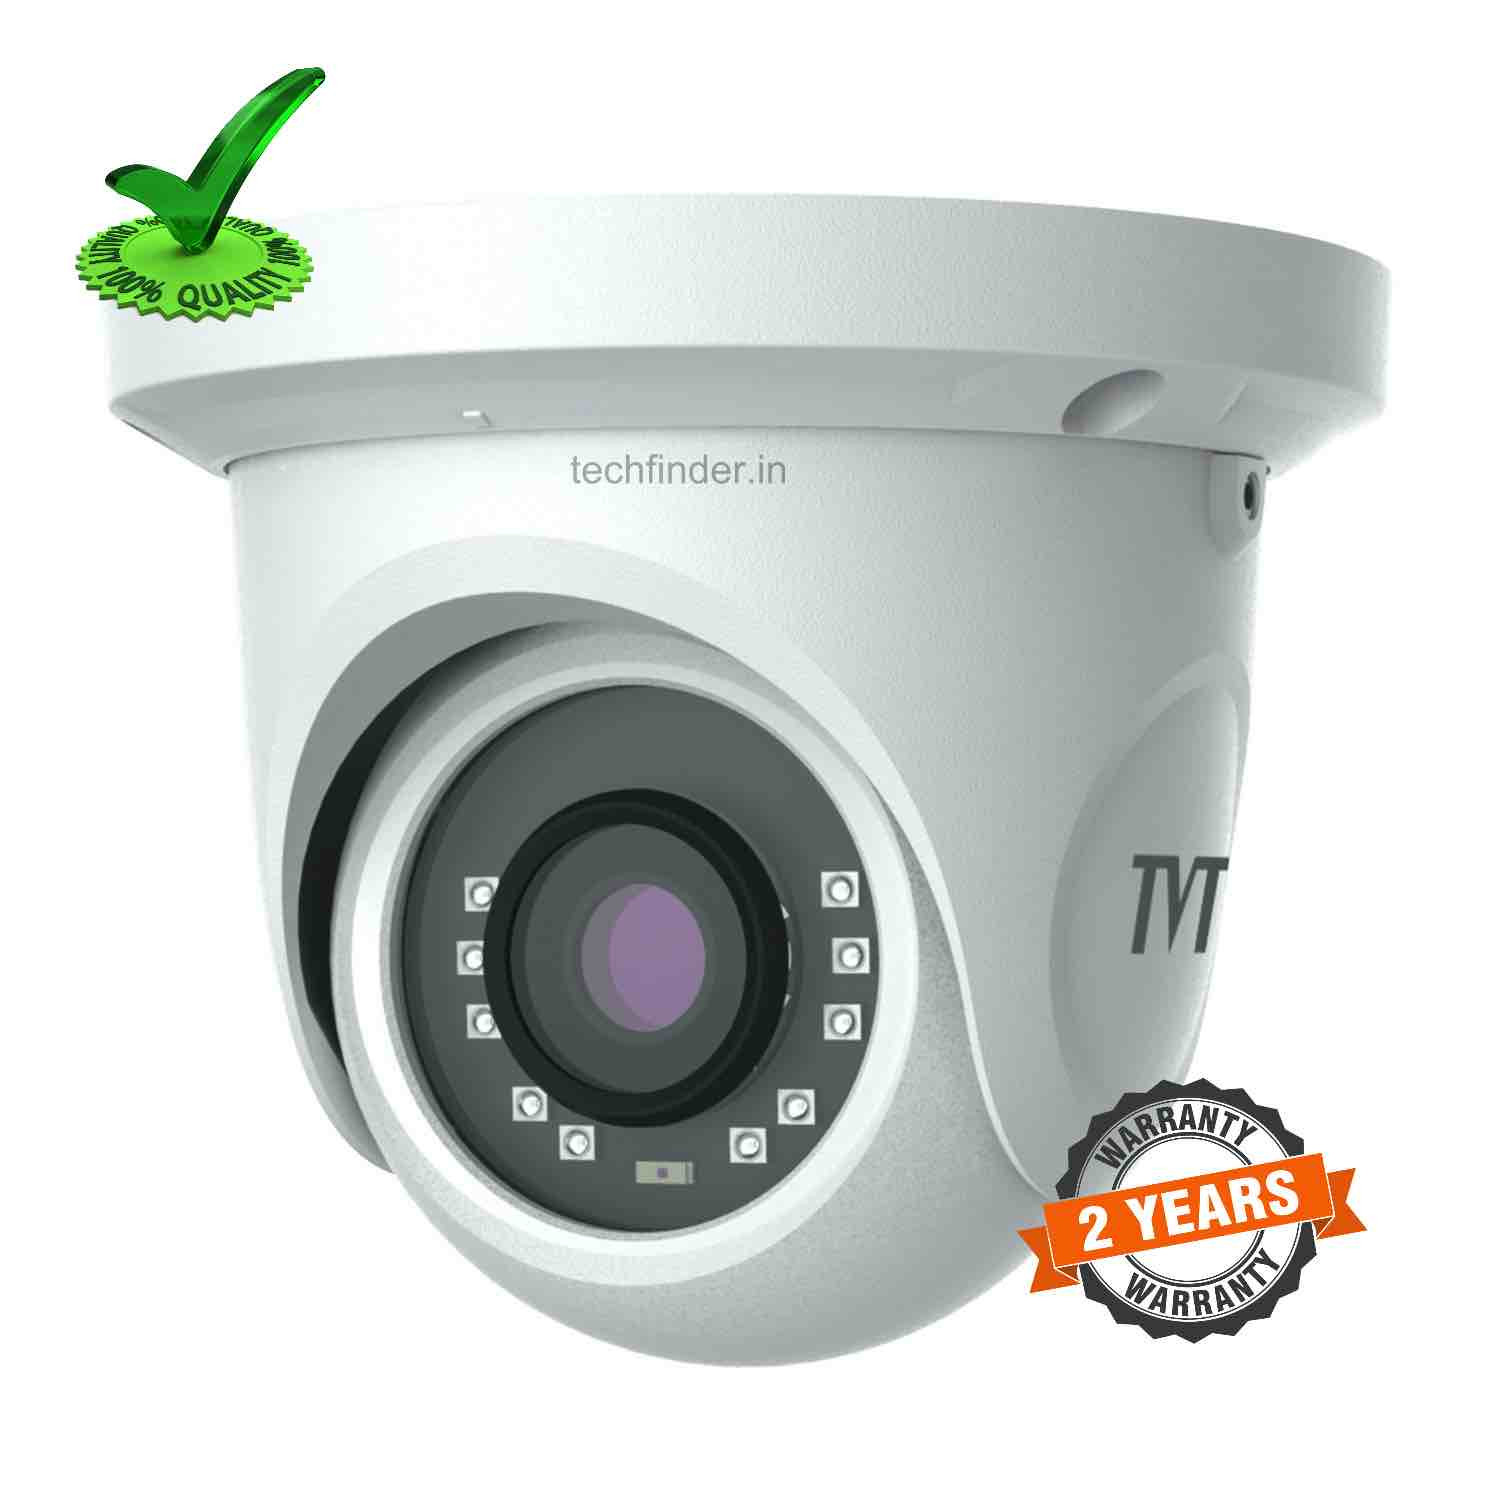 TVT TD 7524AS 2 MP AHD IP IR water proof Dome Camera